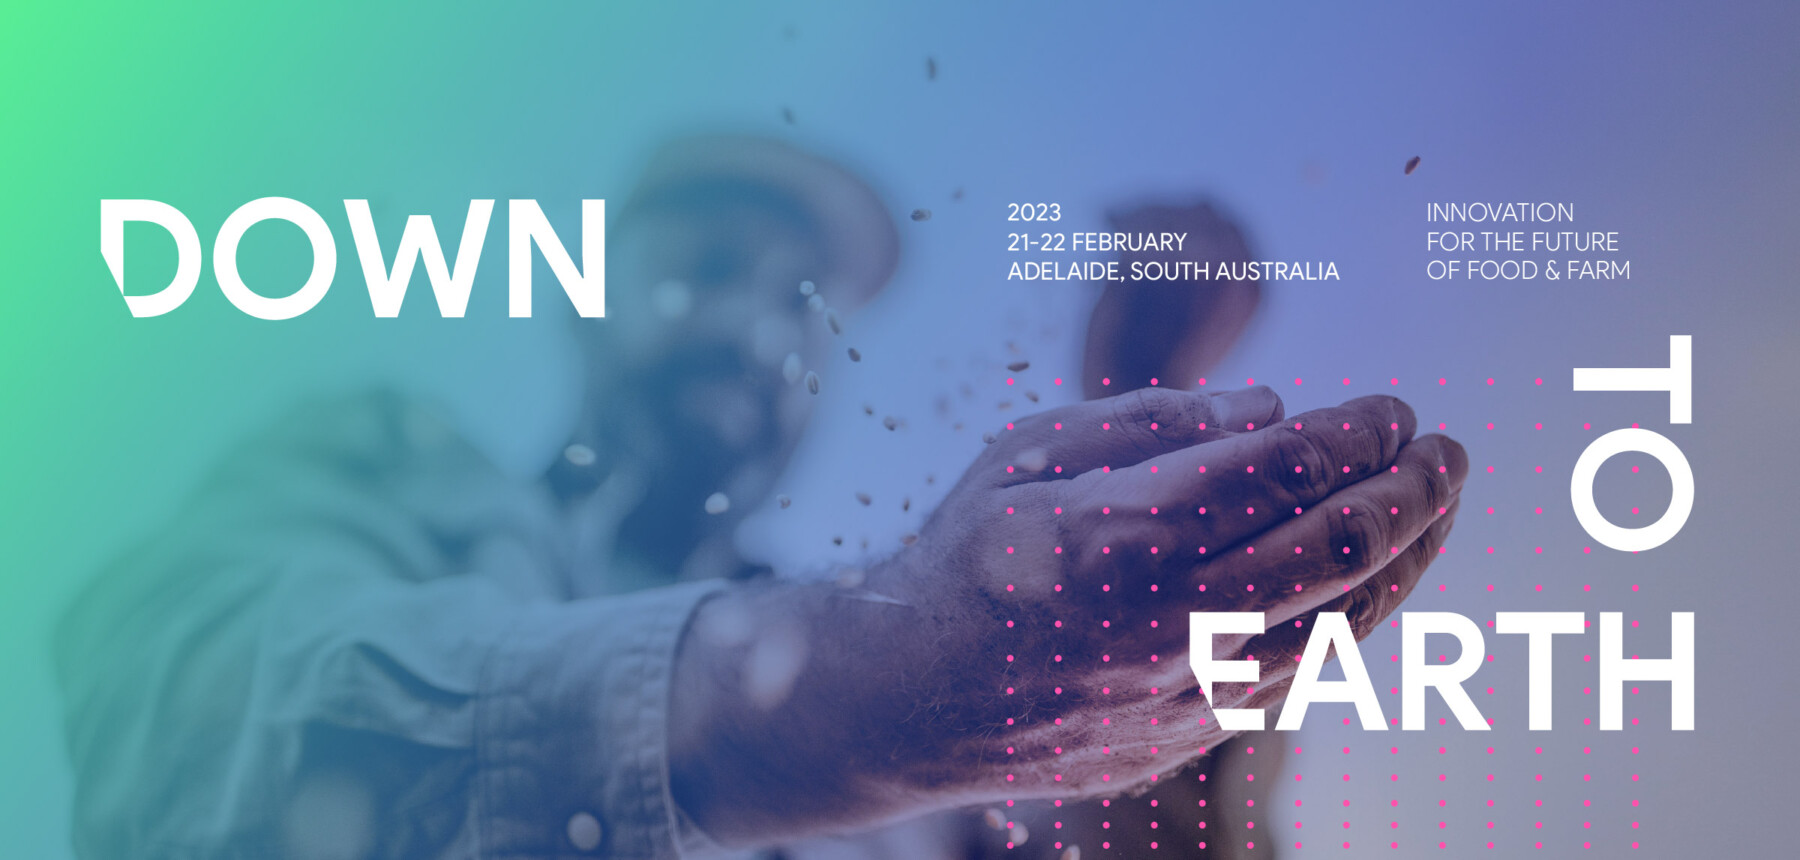 evoke<sup>AG.</sup> - Down to Earth: Adelaide Convention Centre, South Australia, 21-22 February 2023